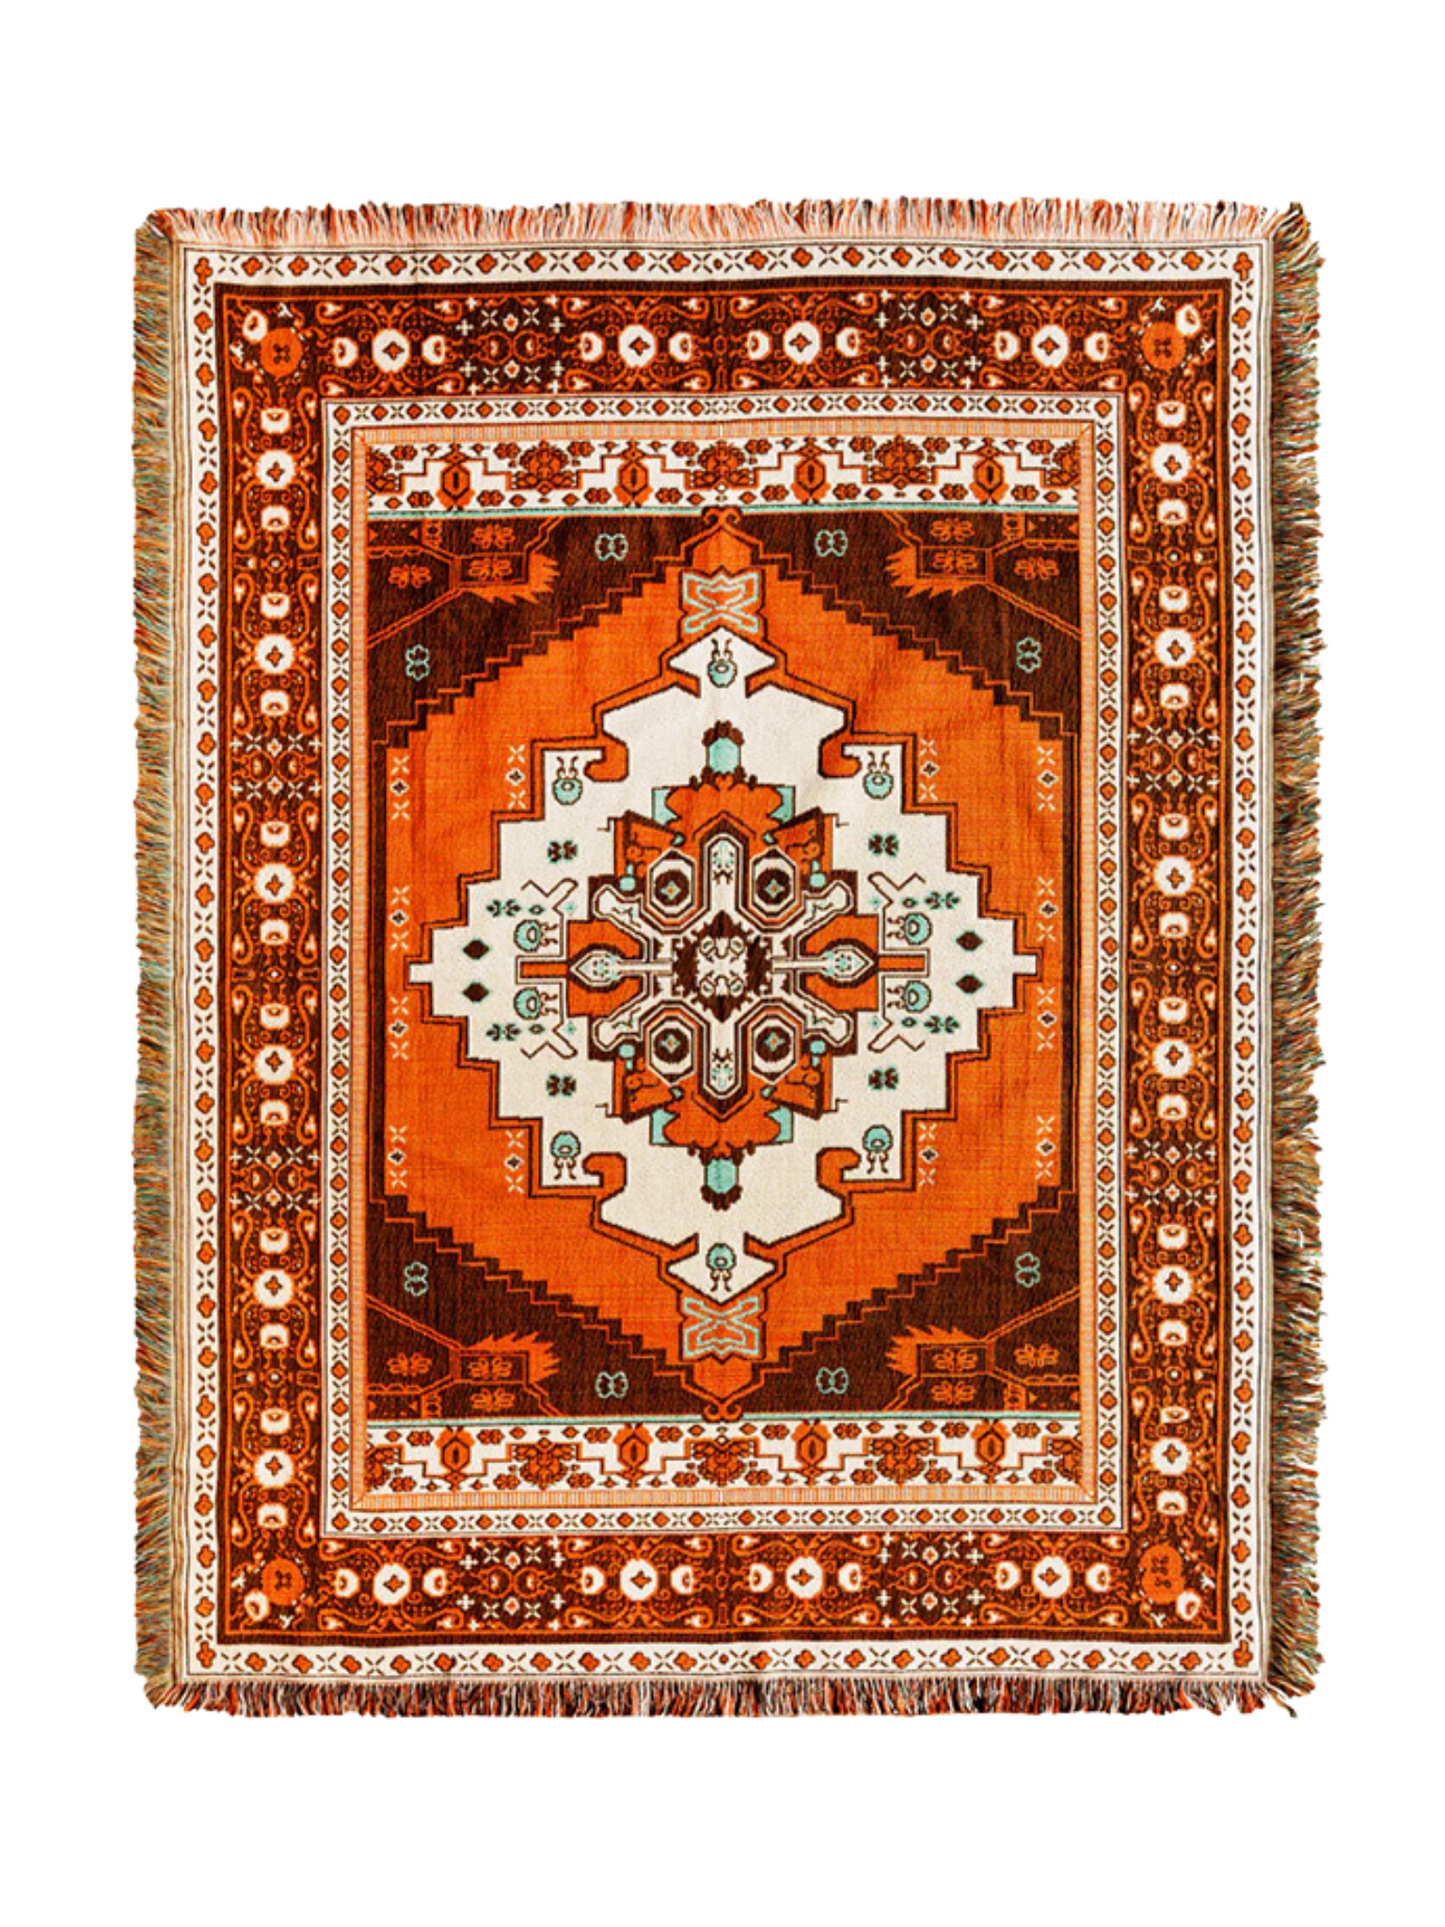 Morocan pattern Woven Boho Quilt Colorful Bohemian Tapestries with tassels on white background